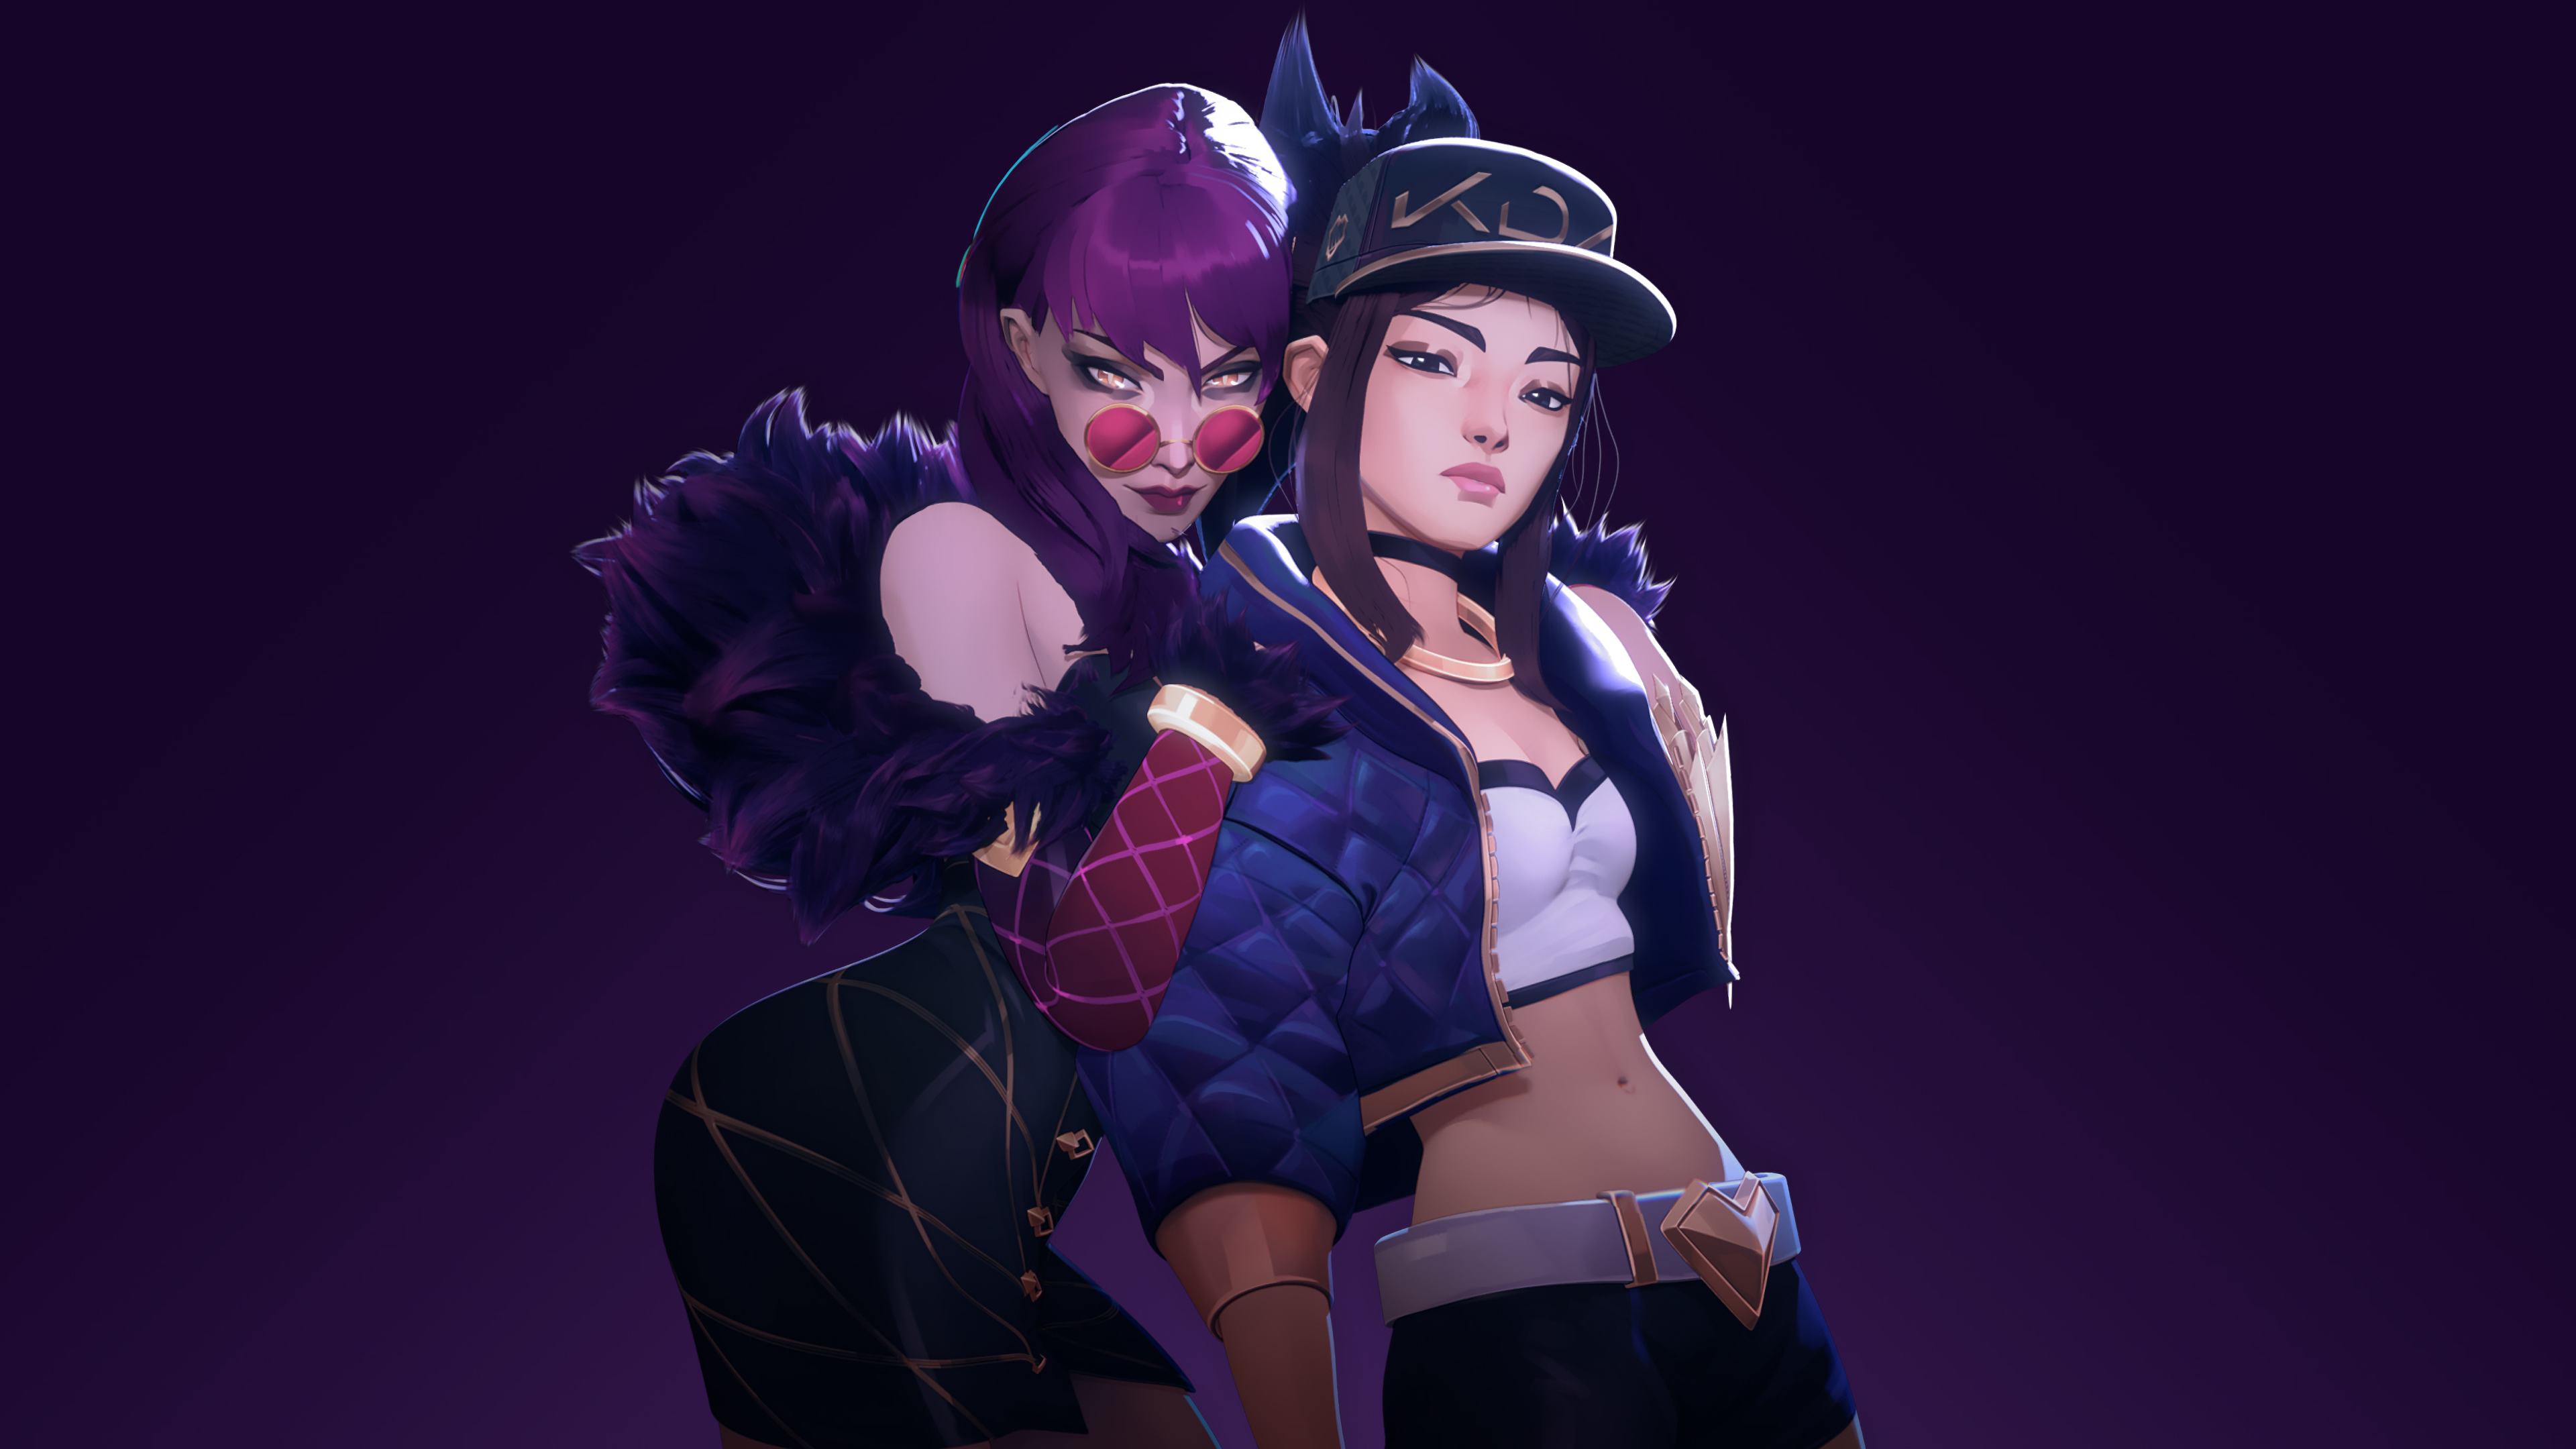 Kda Akali And Evelynn League Of Legends, HD Games, 4k Wallpapers